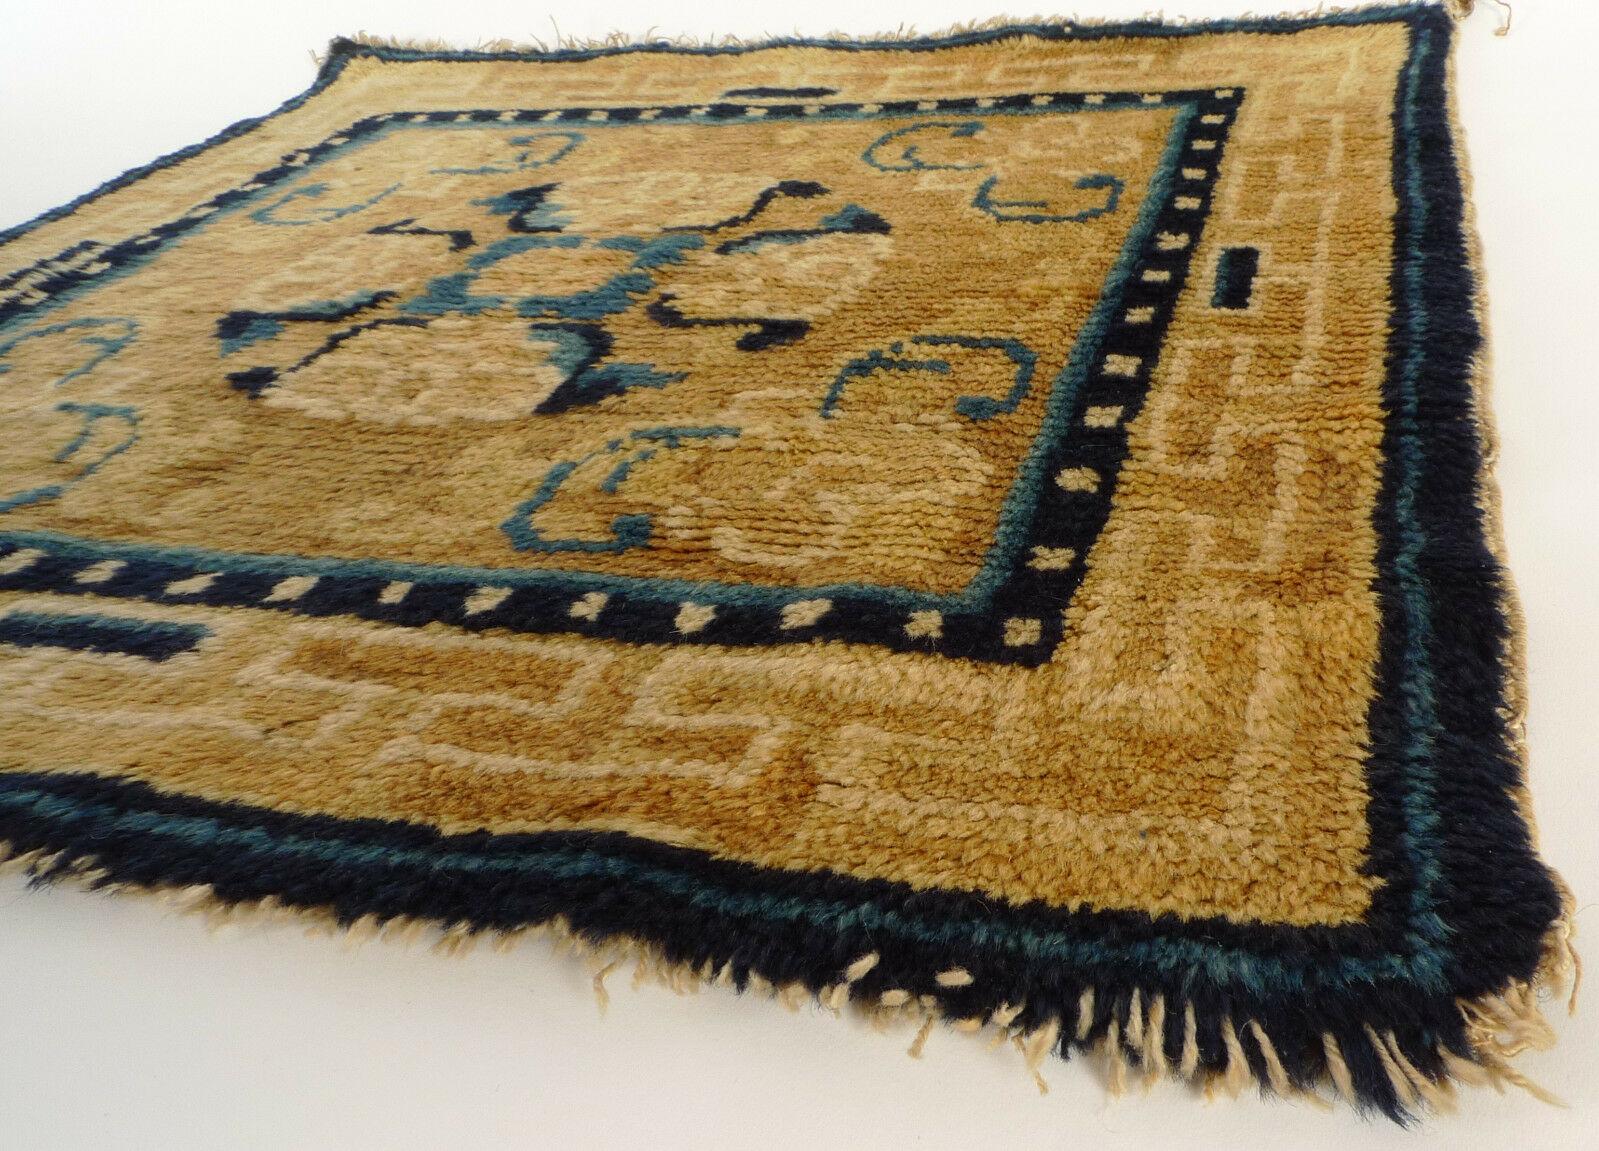 This square carpet, produced around 1800-1830, with a golden yellow field once formed part of one of the long bench covers used in Tibetan monasteries or made maybe also for a single Throne seat. The cruciform design at the centre of the field